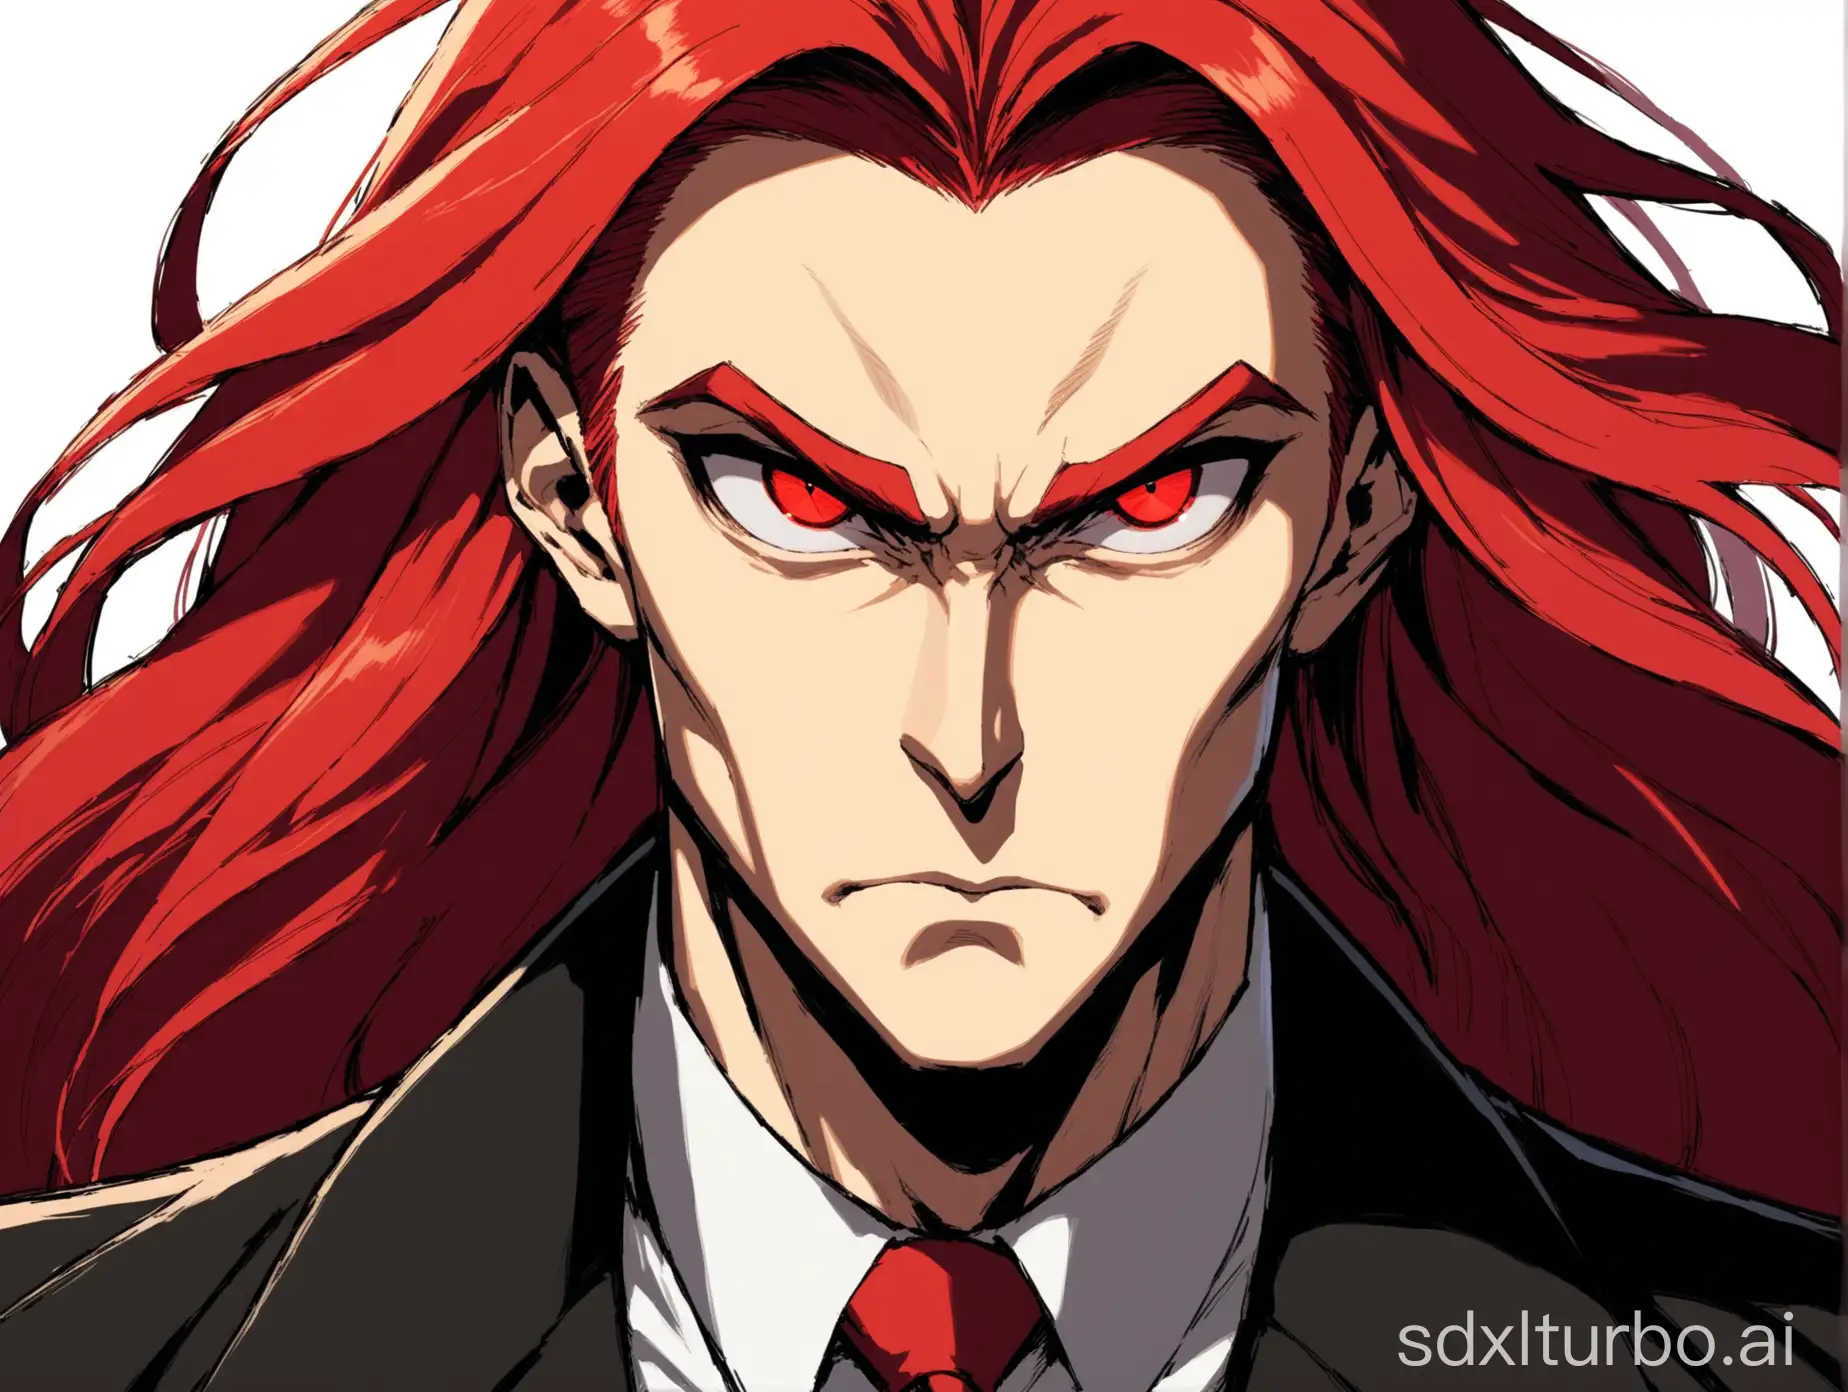 Sinister-Man-with-Long-Red-Hair-and-Piercing-Gaze-in-Black-Jacket